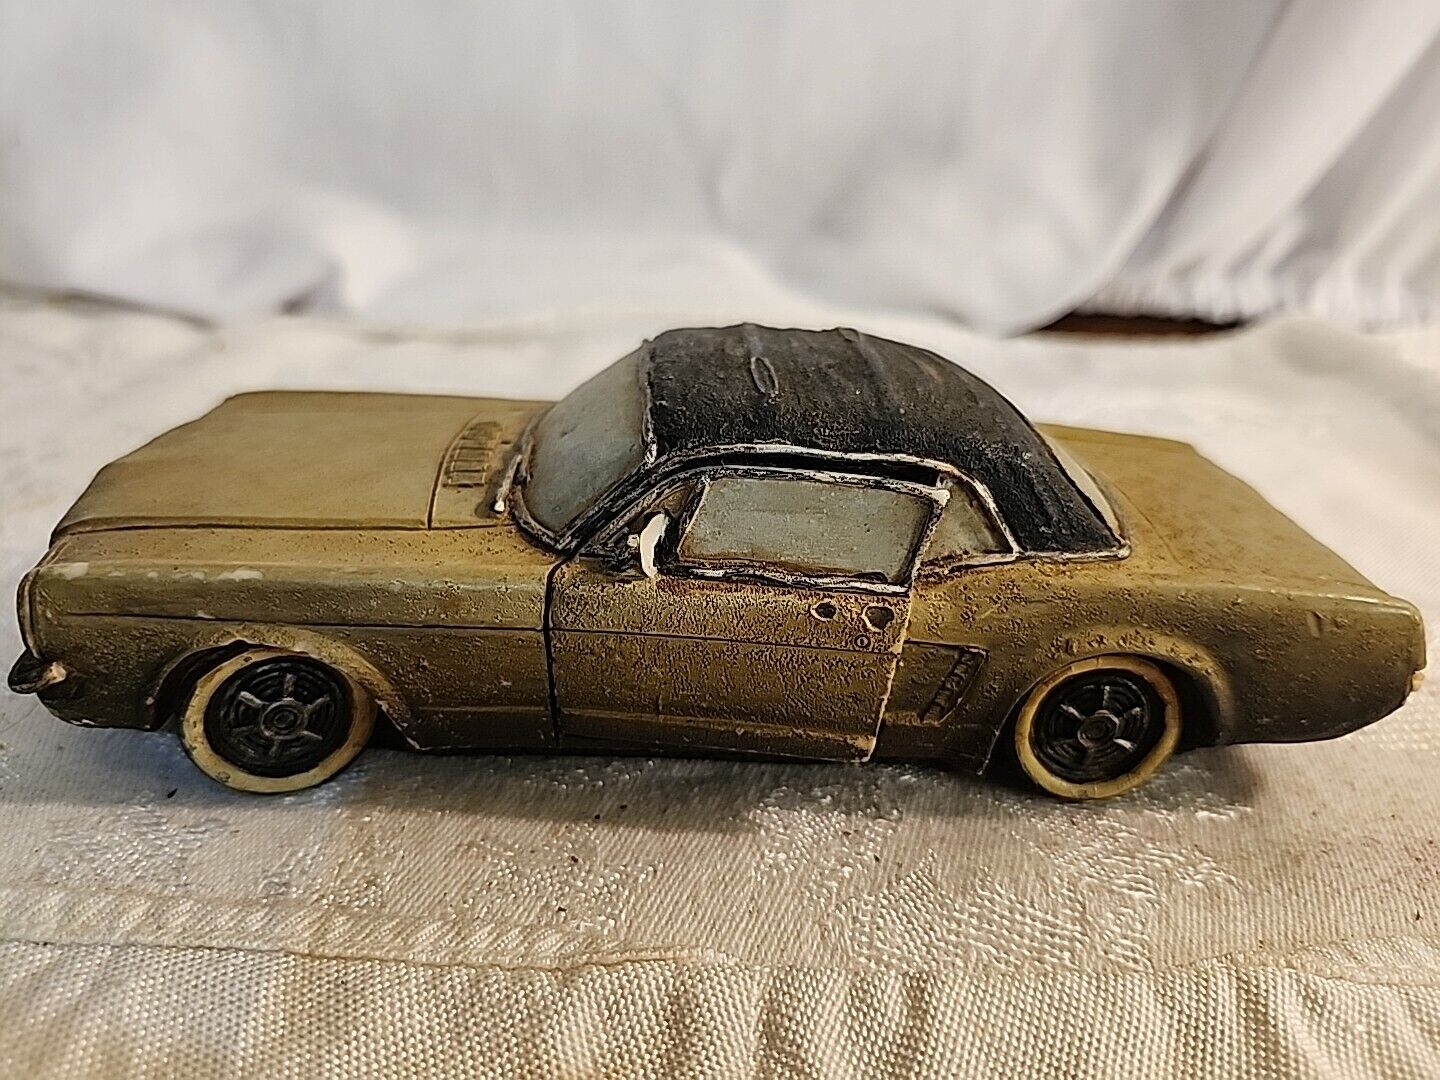 Rare Popular Imports 1964 Ford Mustang Convertible Barn Find Resin Sculpture Tan